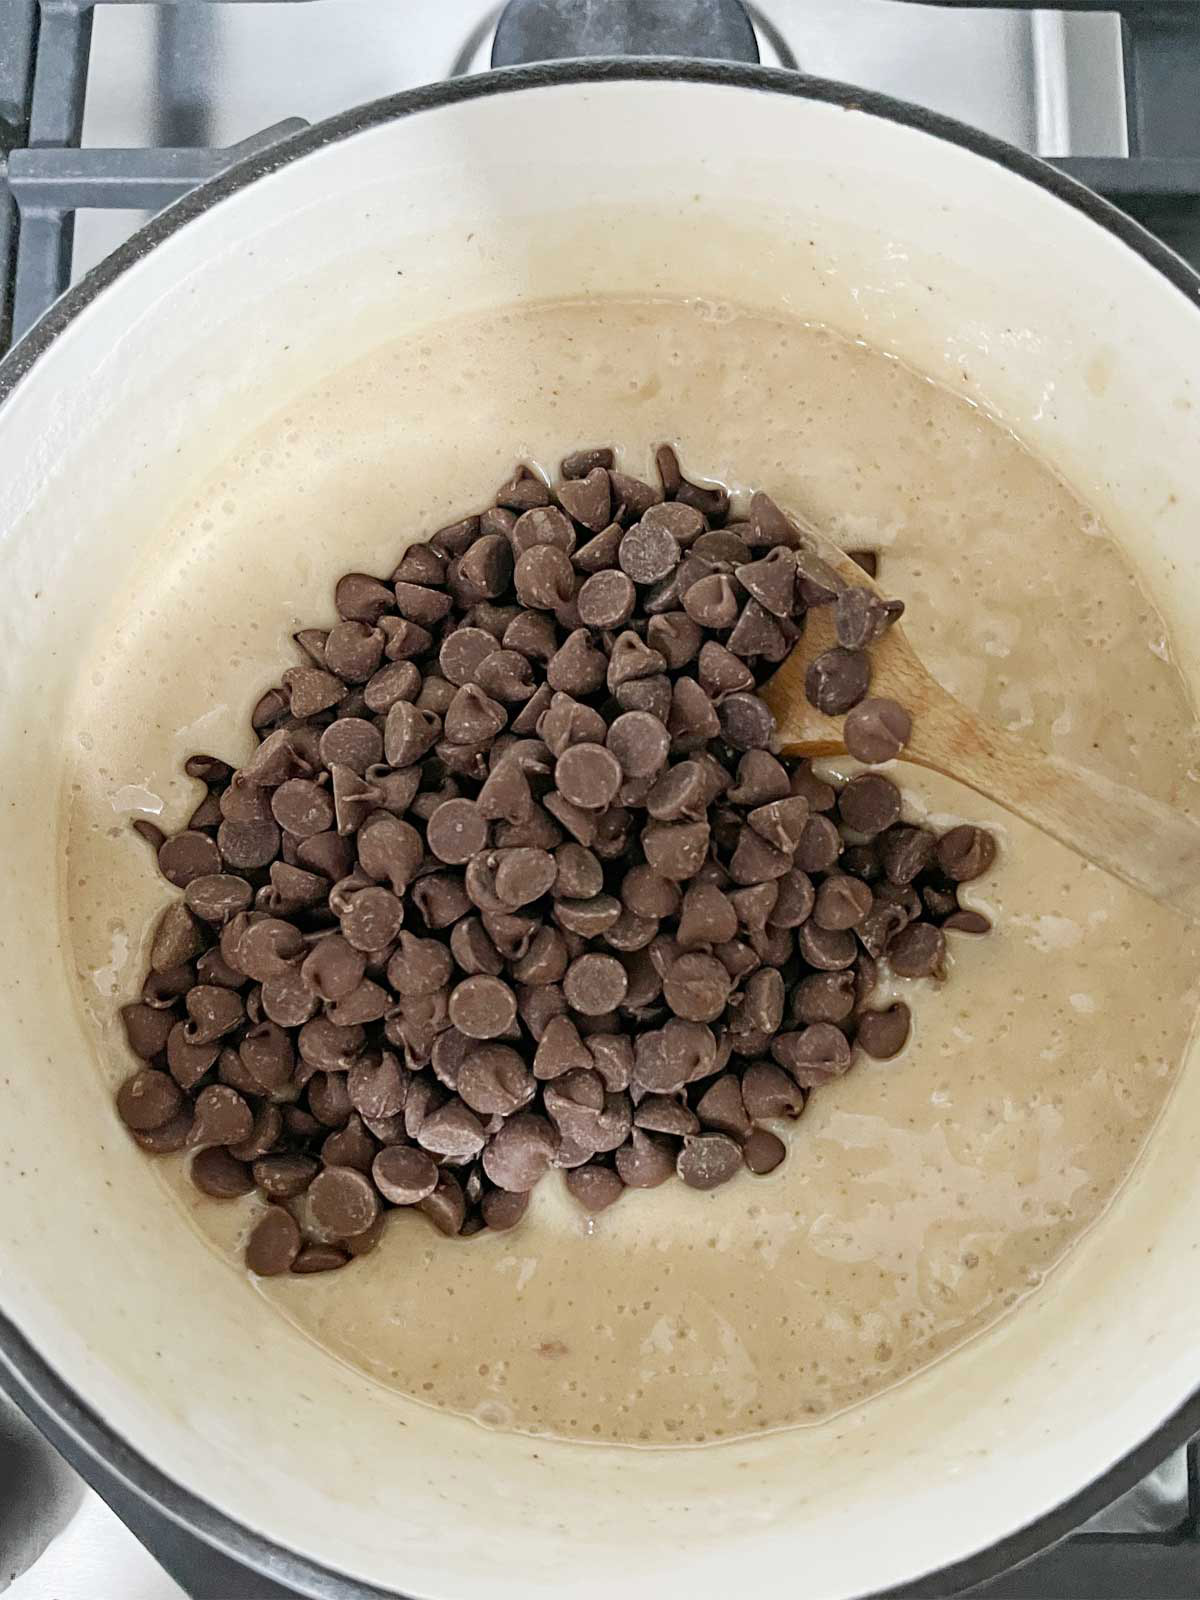 Chocolate chips poured into hot bubbling sugar mixture.